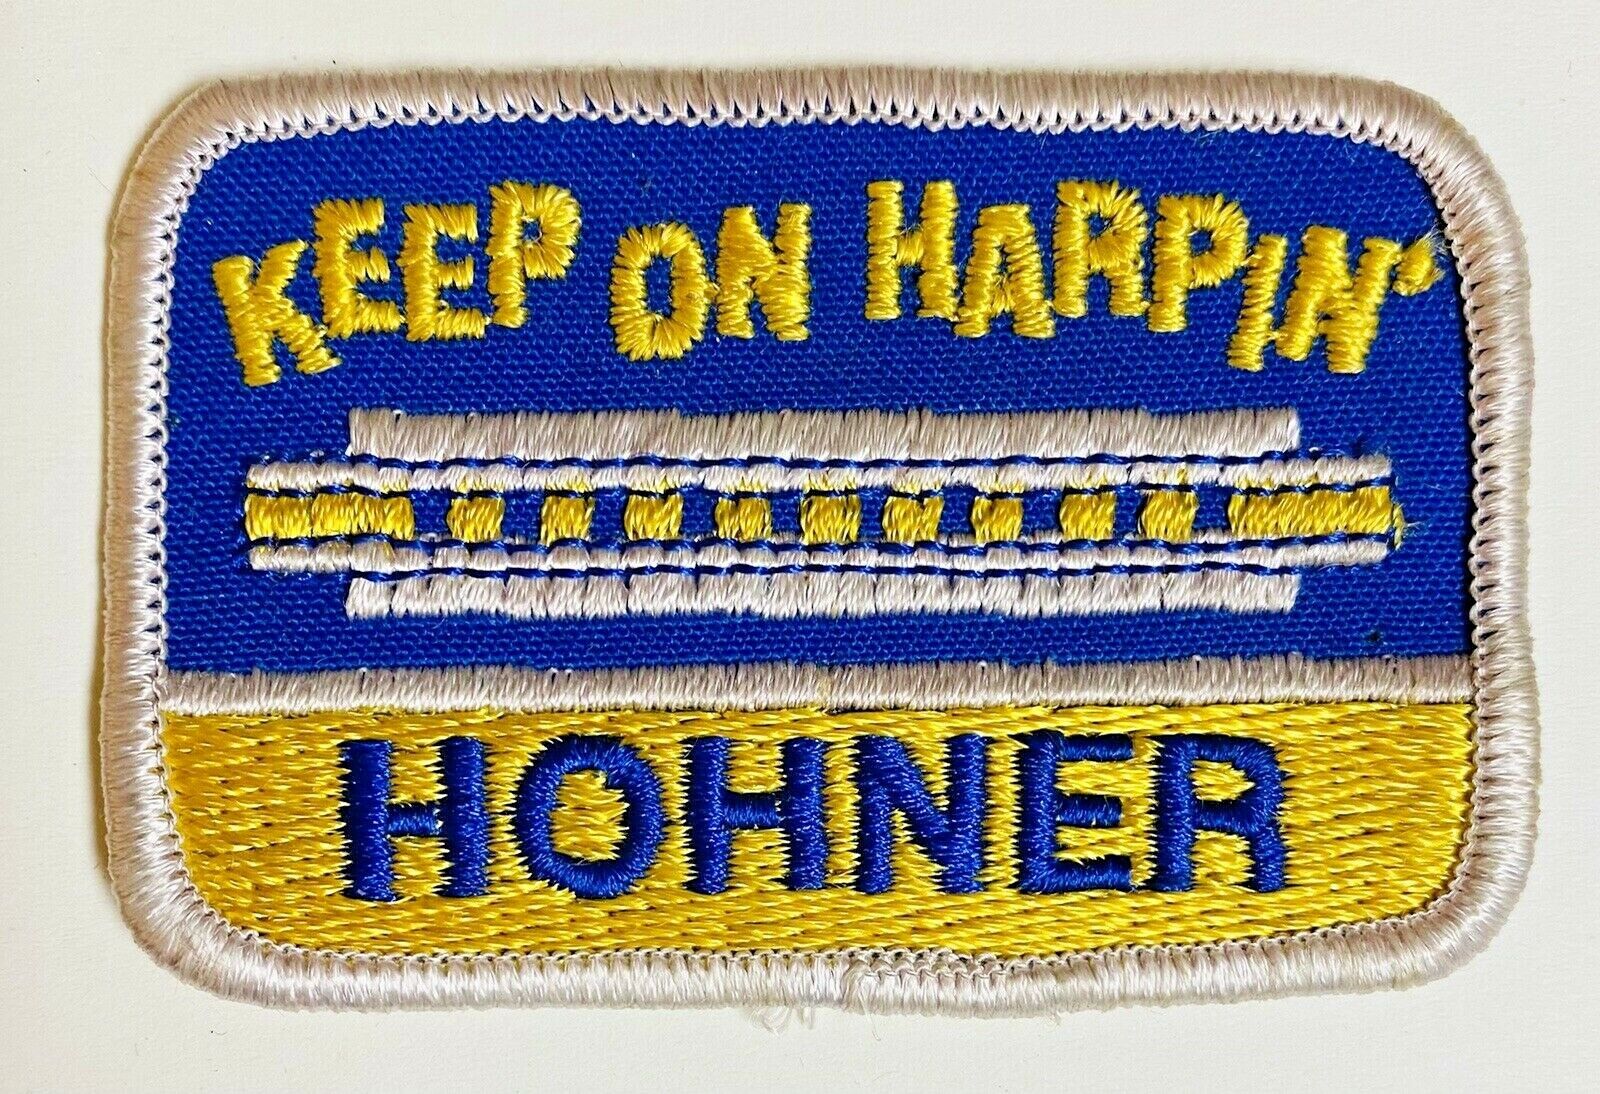 Hohner Harmonica Patch Vintage Keep On Harpin’ Logo Embroidered Used